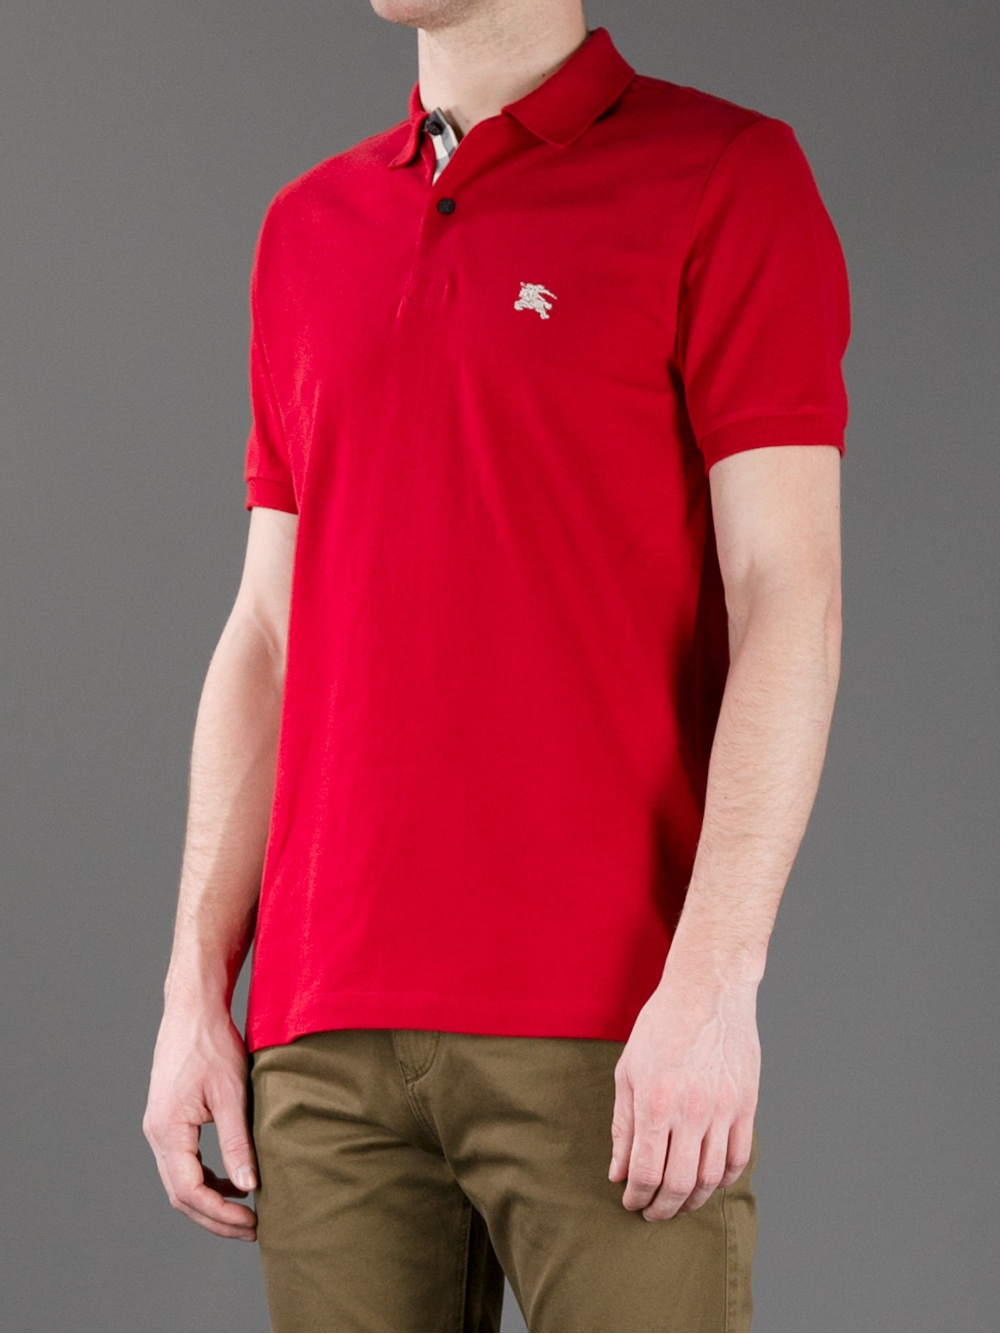 at føre Kontrovers Ynkelig Burberry Brit Classic Polo Shirt in Red for Men - Lyst